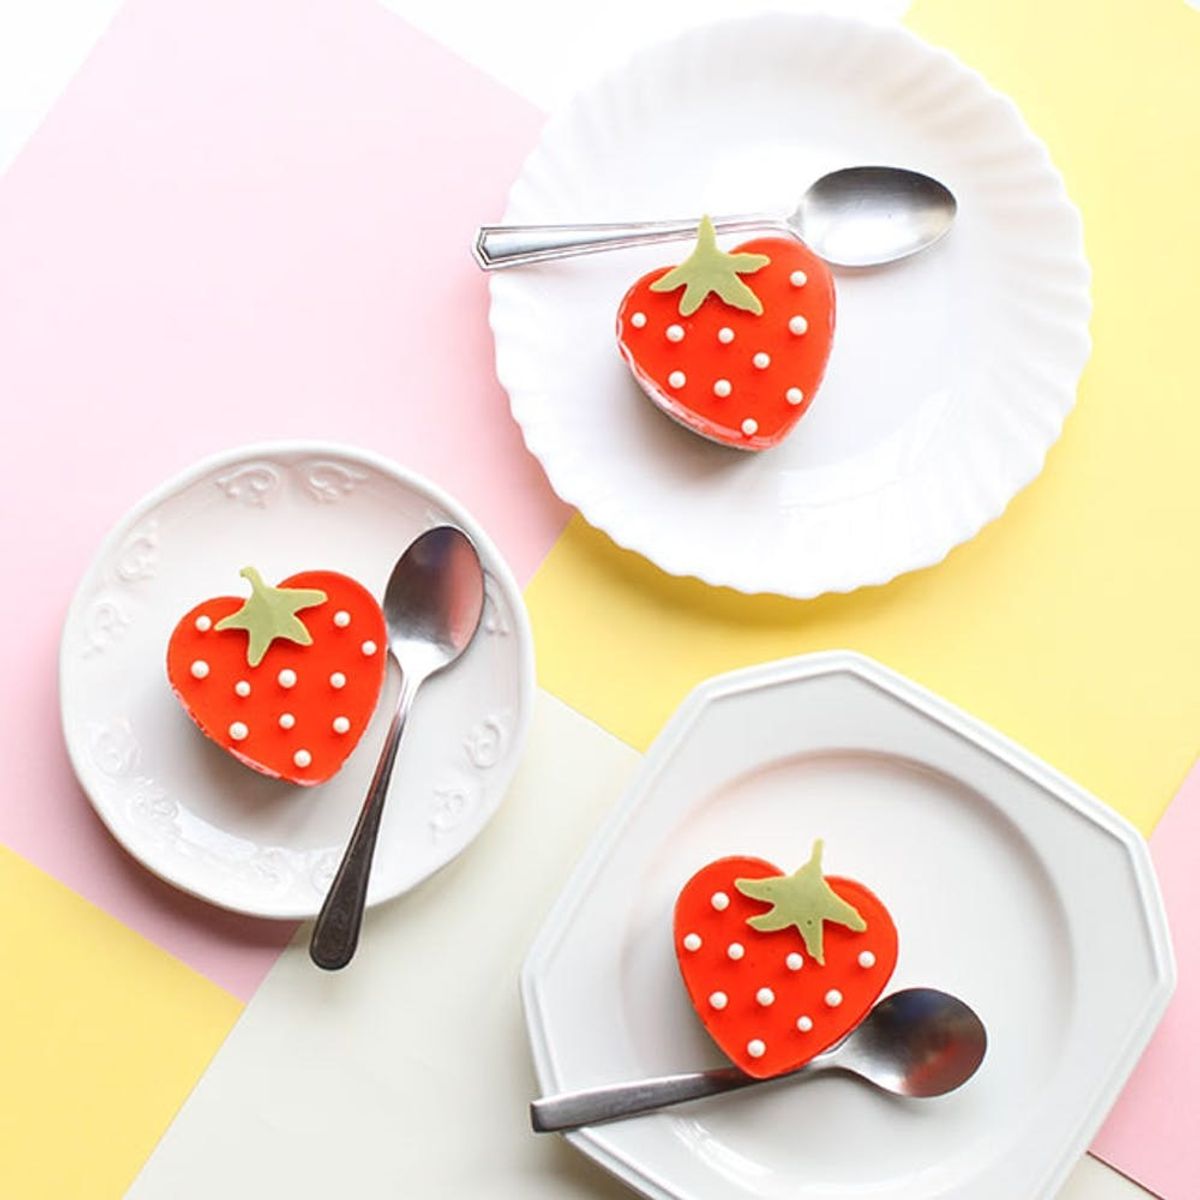 These No-Bake Strawberry Cheesecakes Are the Cutest Things You’ll Ever Eat